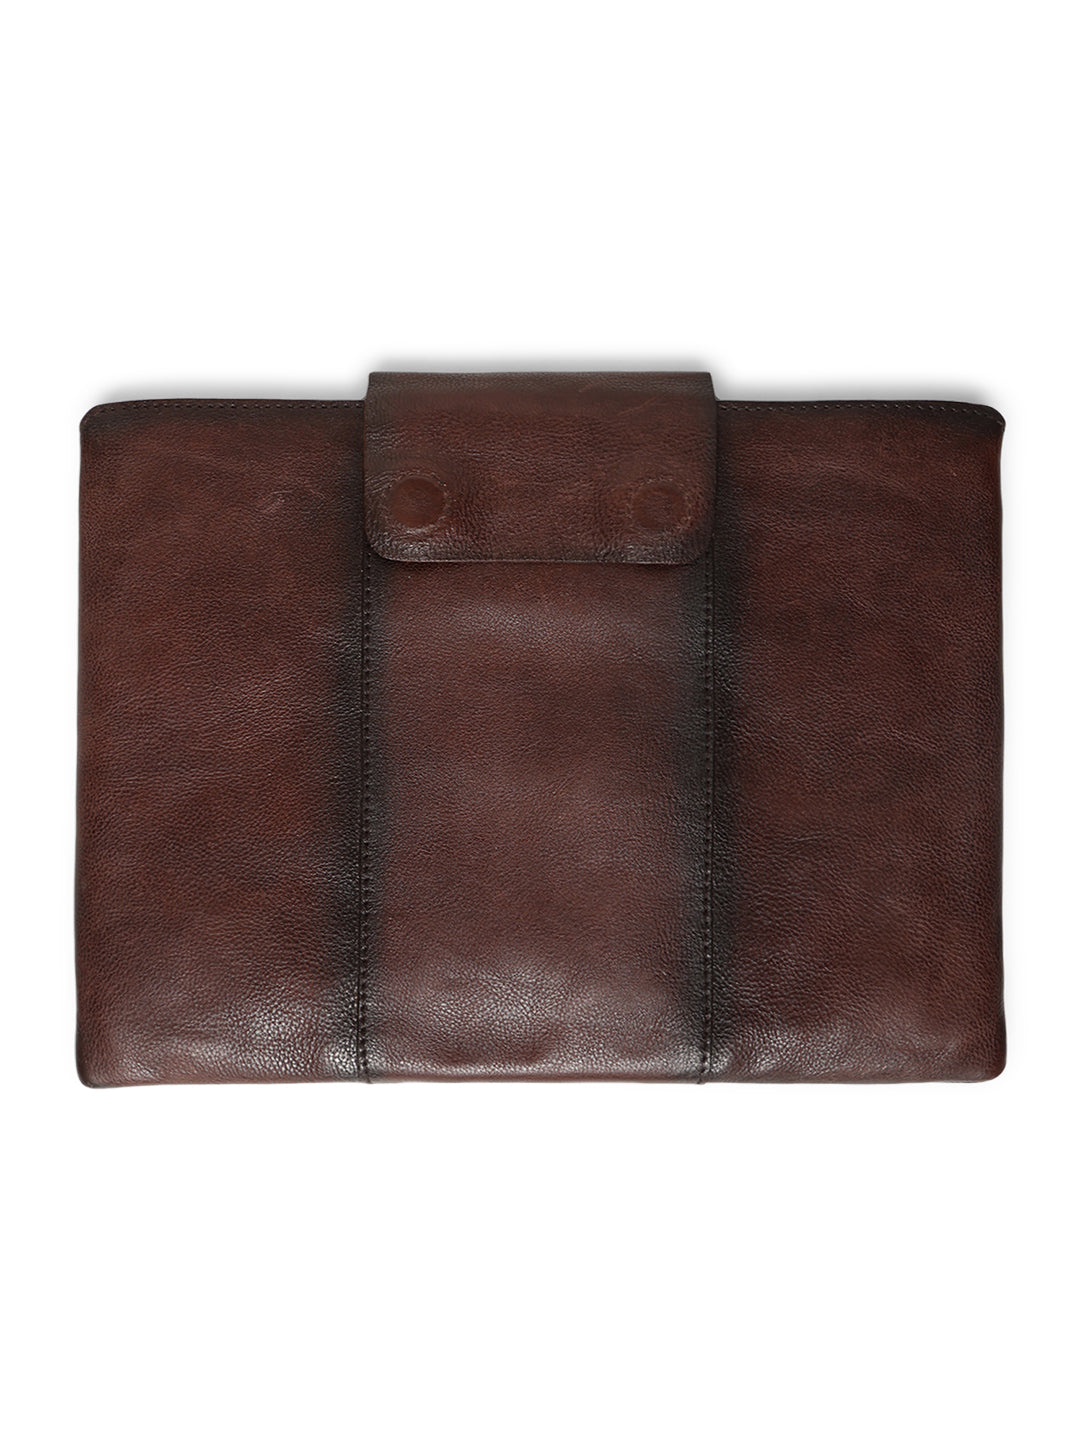 LuxeGuard Brown Leather Laptop Sleeves